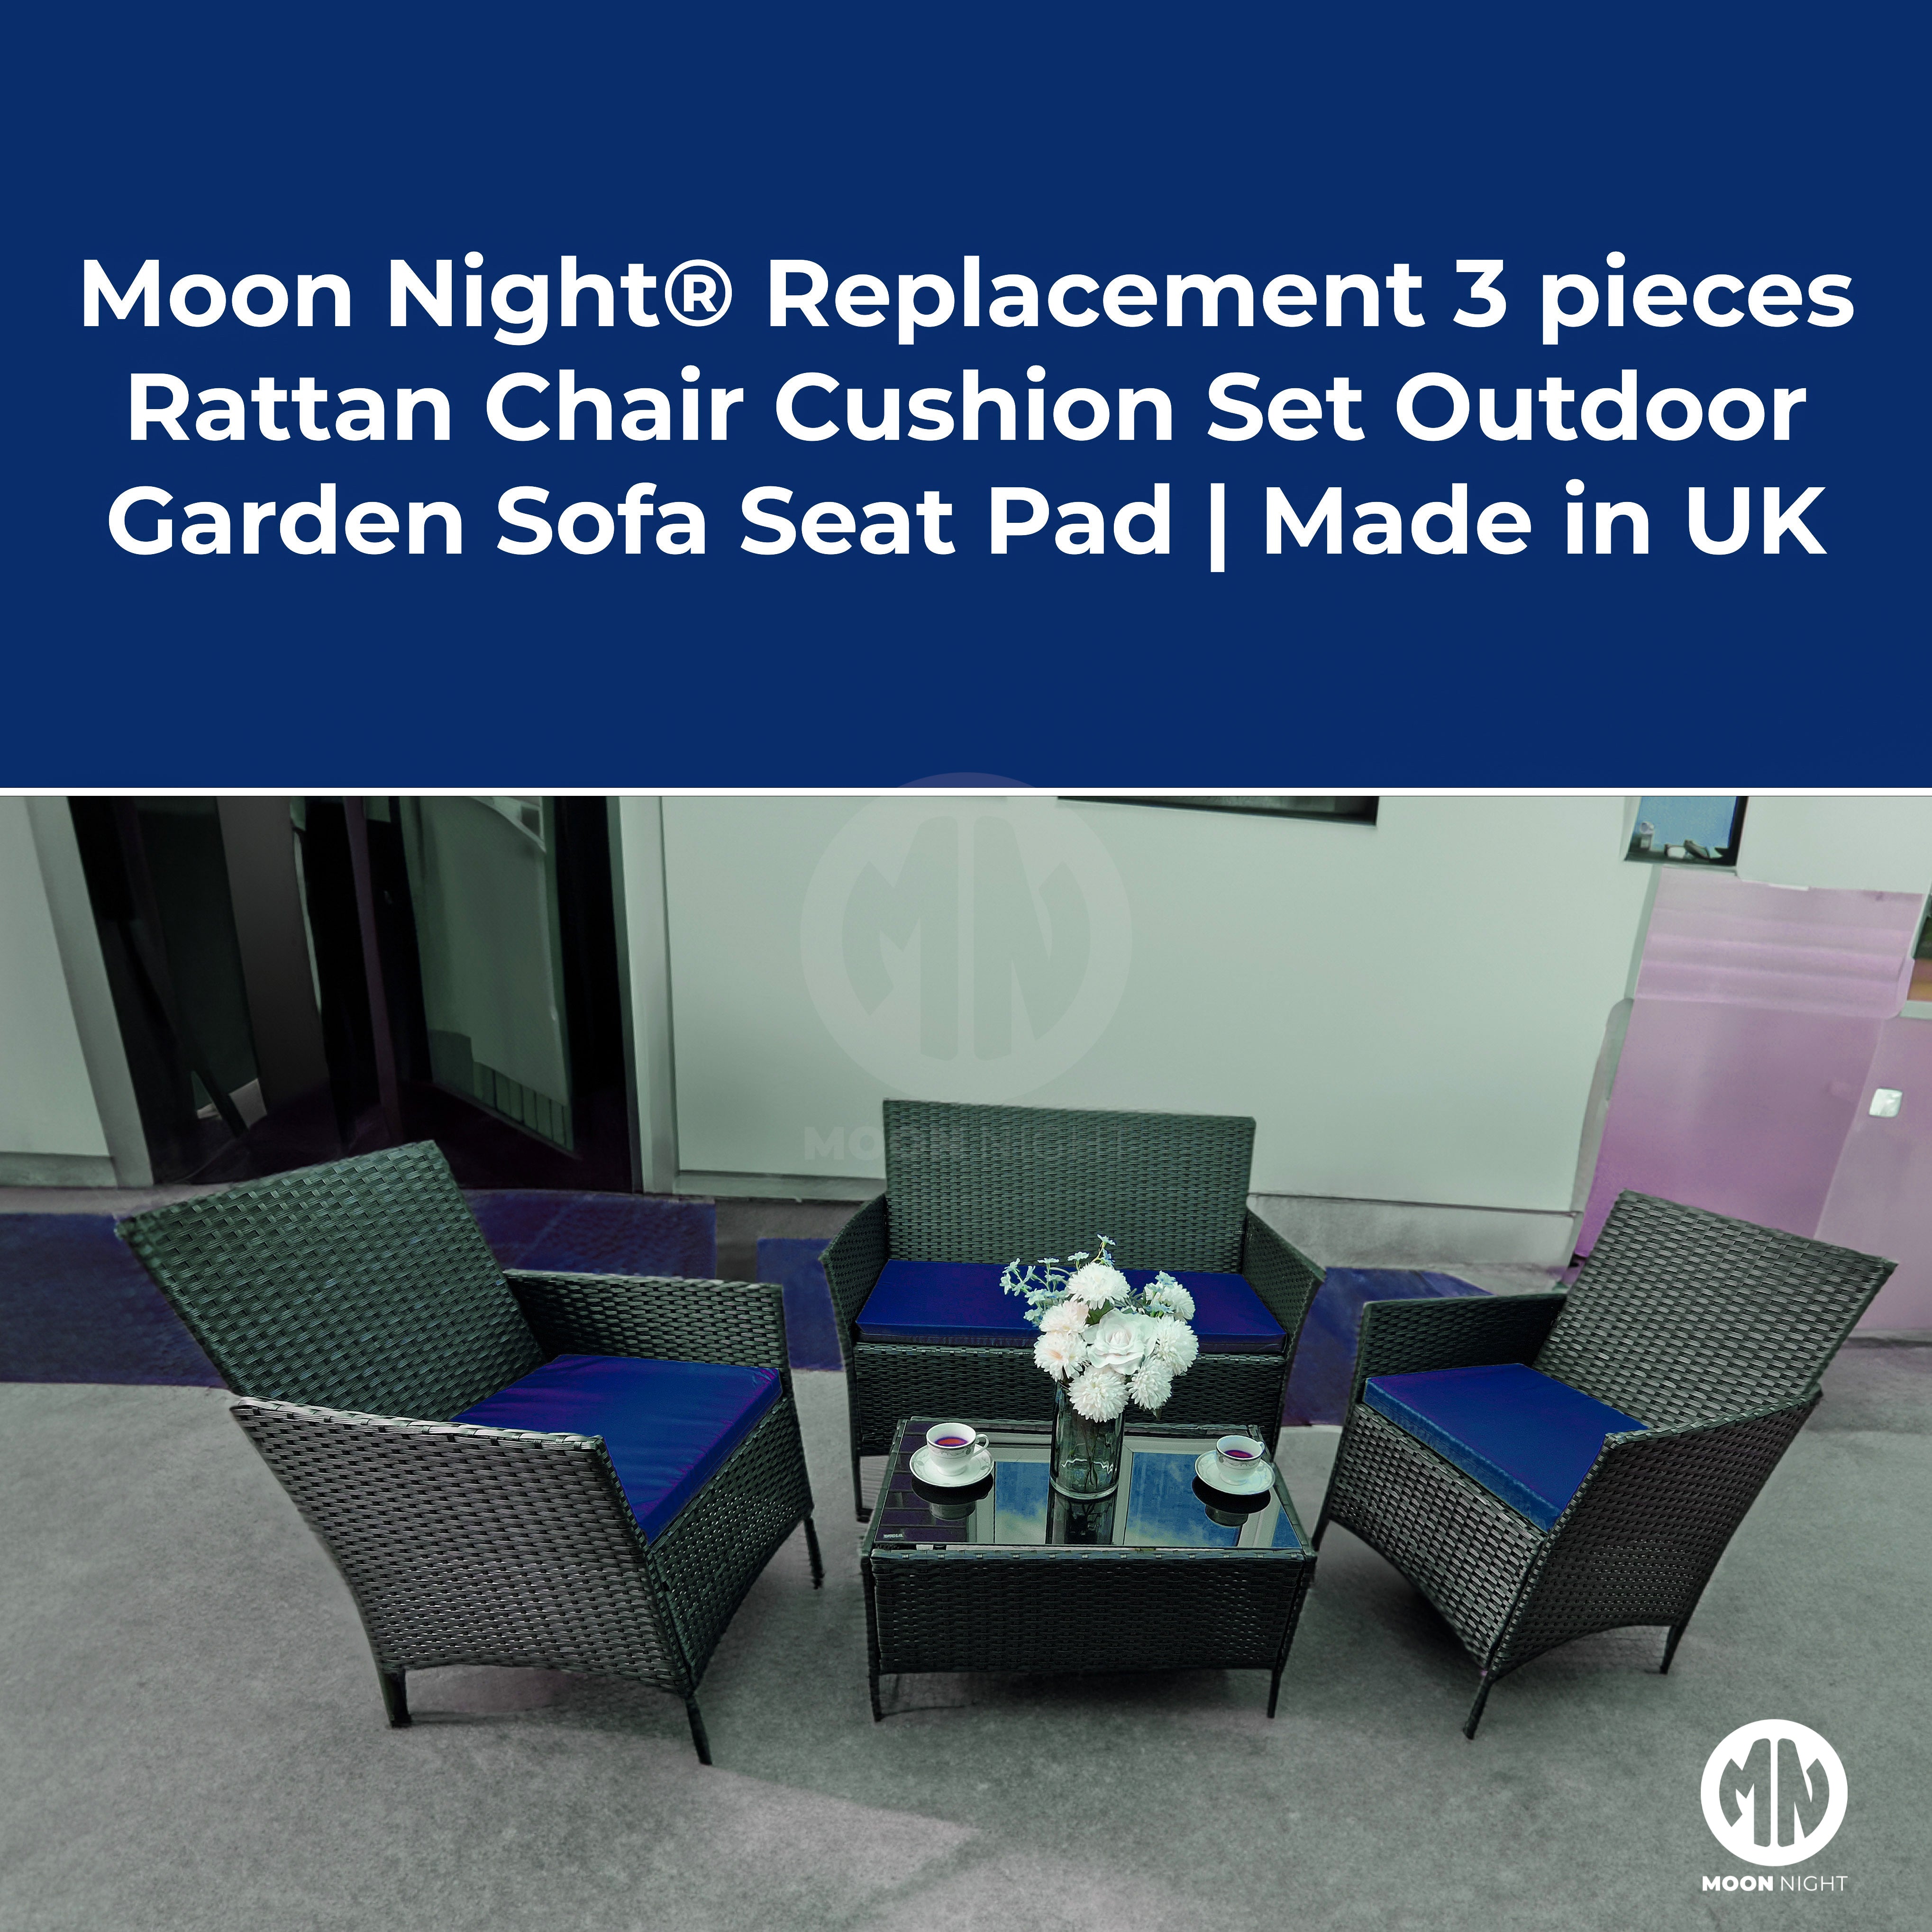 Moon Night® Replacement 3 pieces Rattan Chair Cushion Set Outdoor Garden Sofa Seat Pad [Made in UK]- Navy Bl